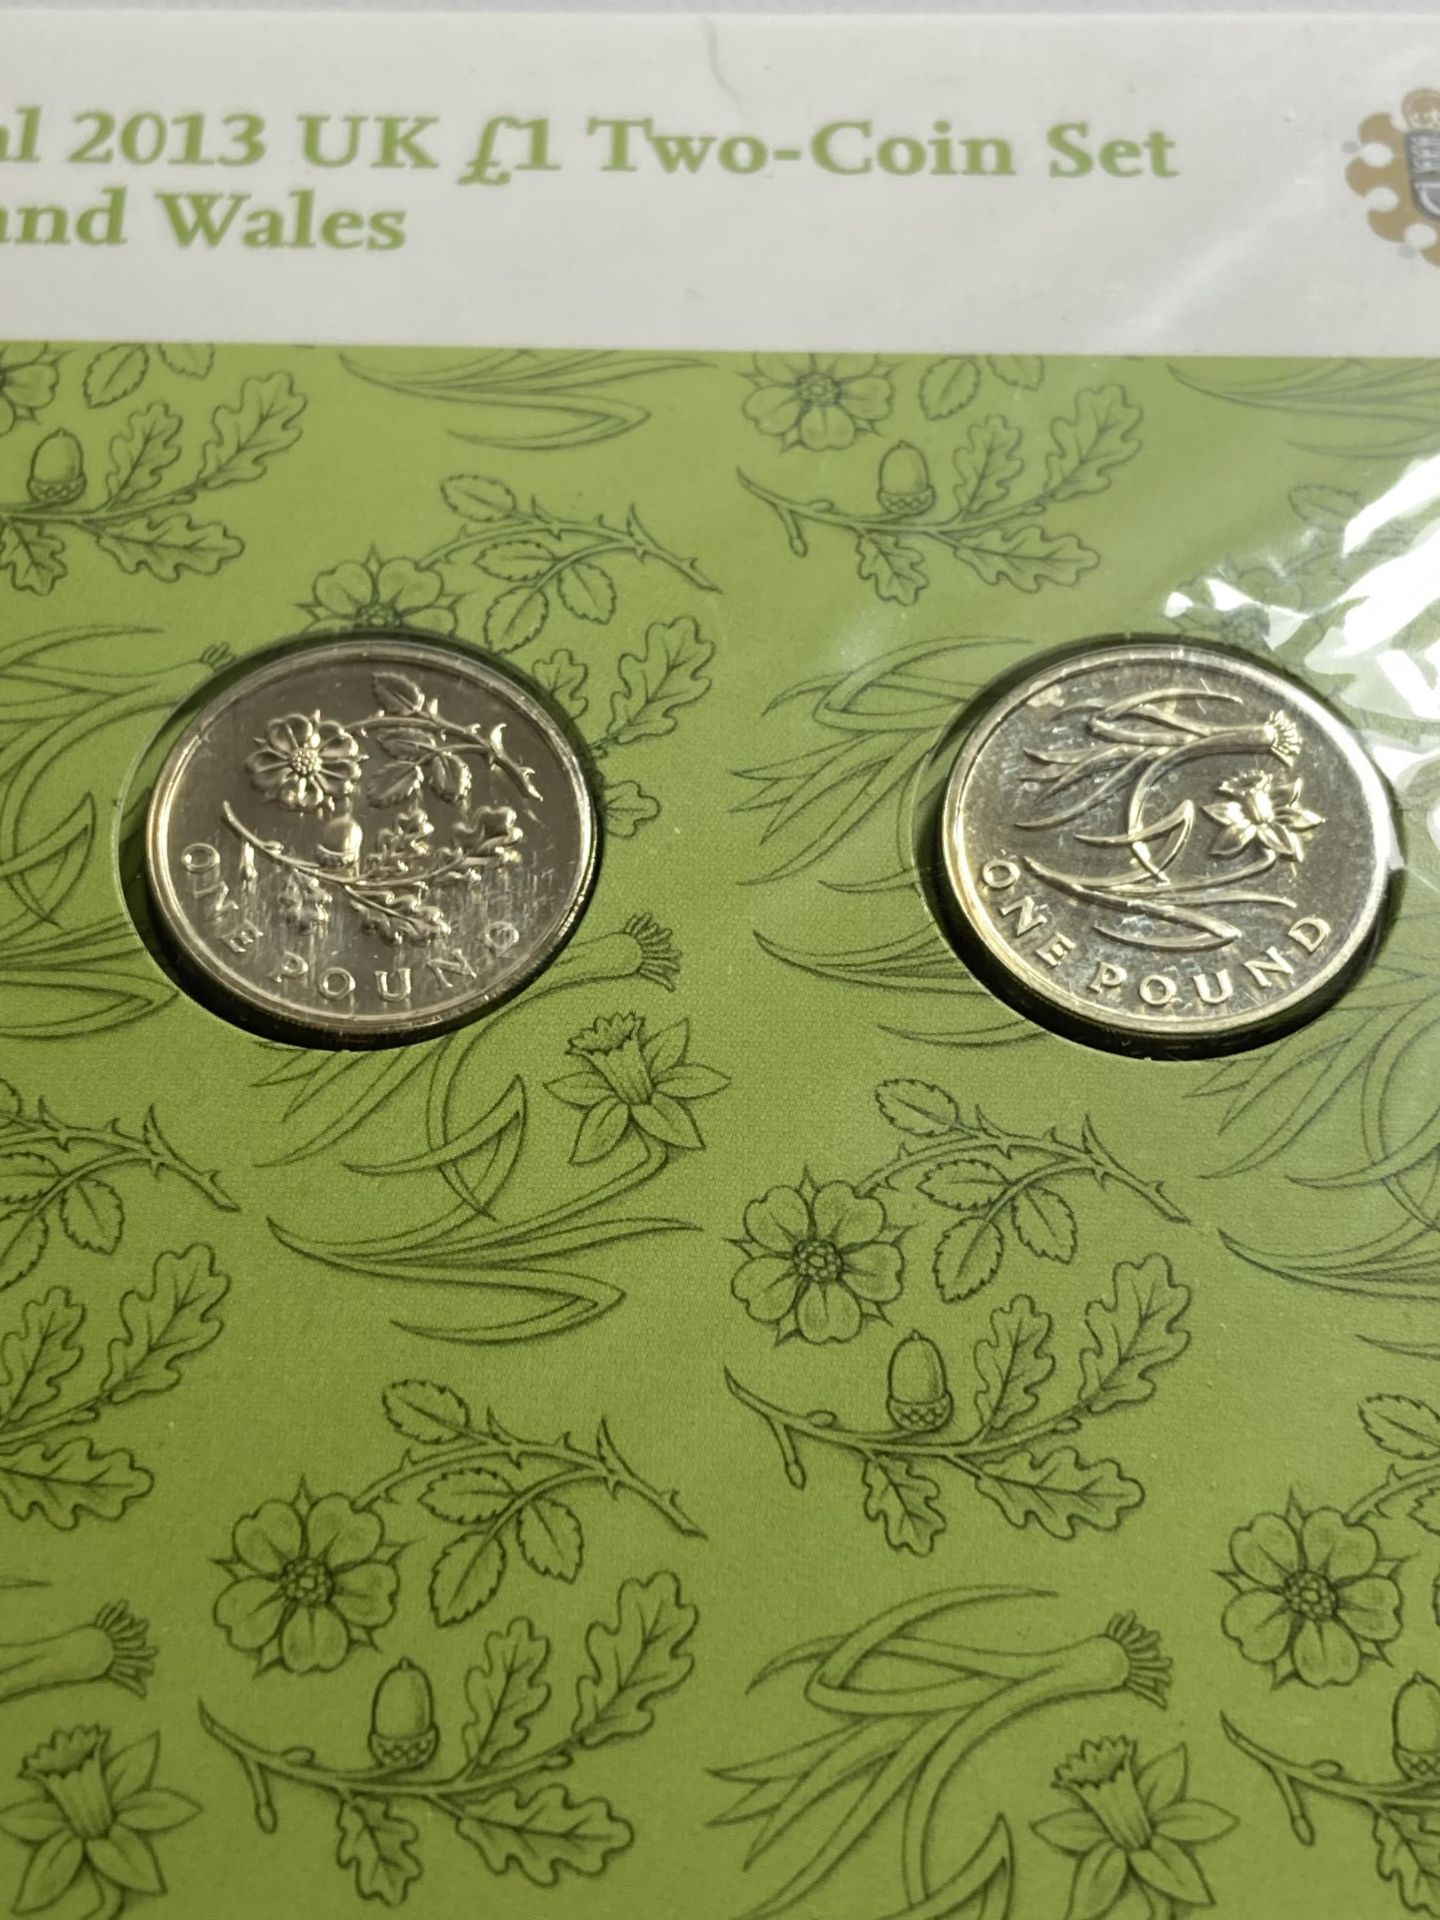 THE ROYAL MINT THE FLORAL 2013 UK £1 TWO COIN SETS, ENGLAND AND WALES - Image 2 of 2